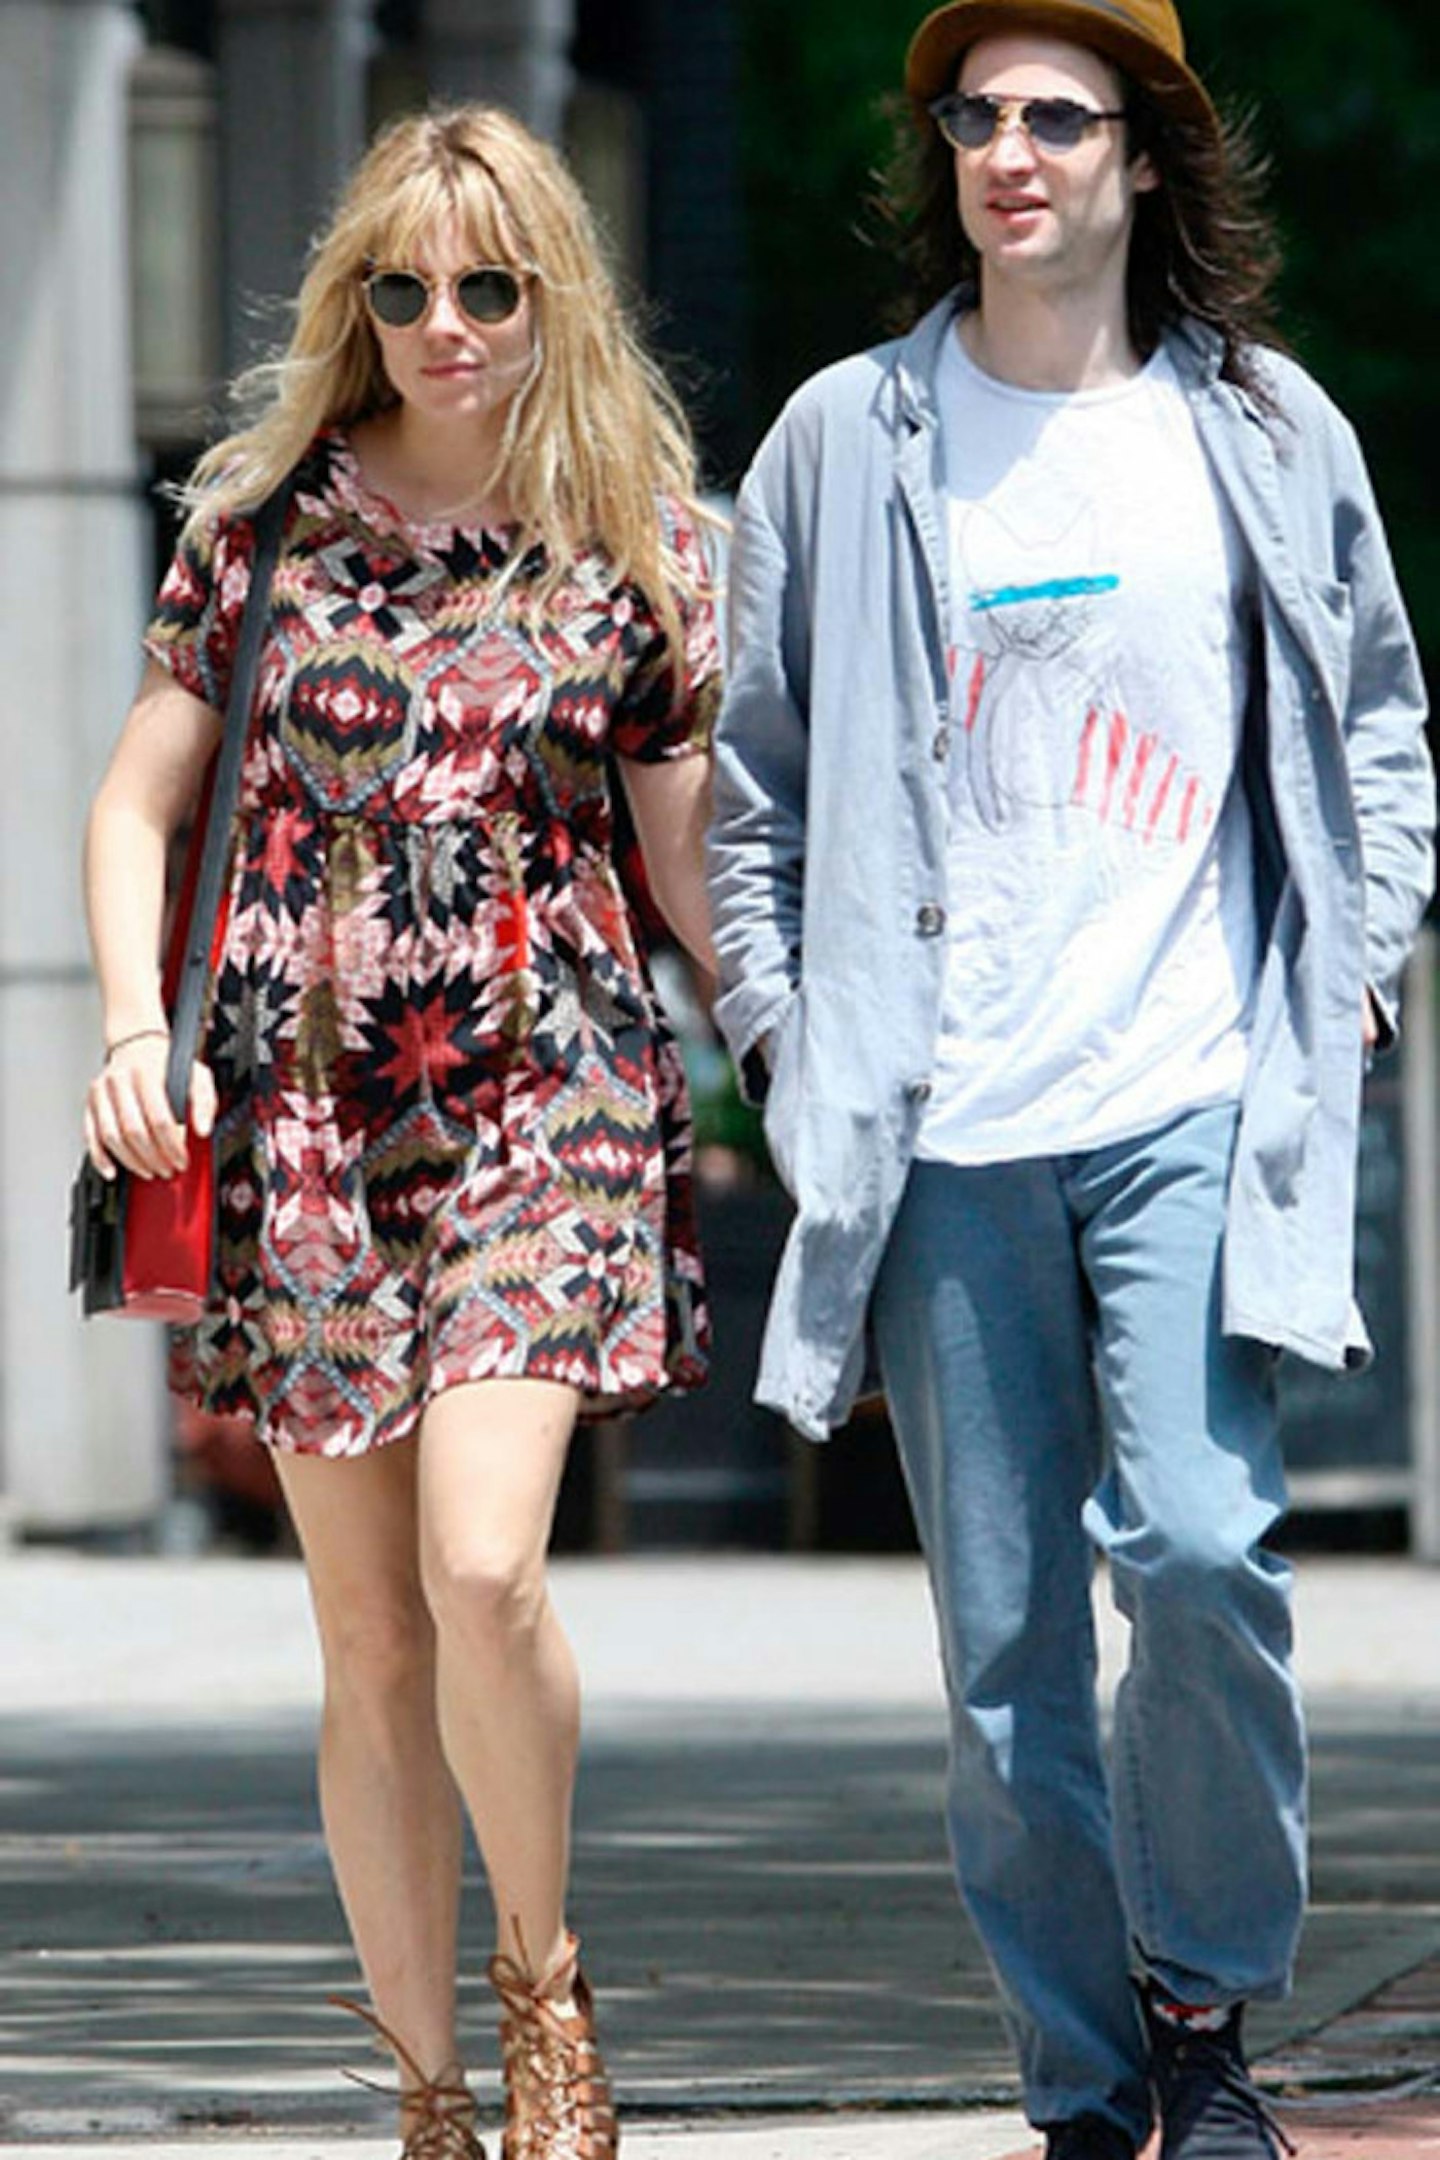 24 3- Sienna Miller in Topshop dress with a Anya Hindmarch Bathurst bag at Glastonbury - 29 June 2013